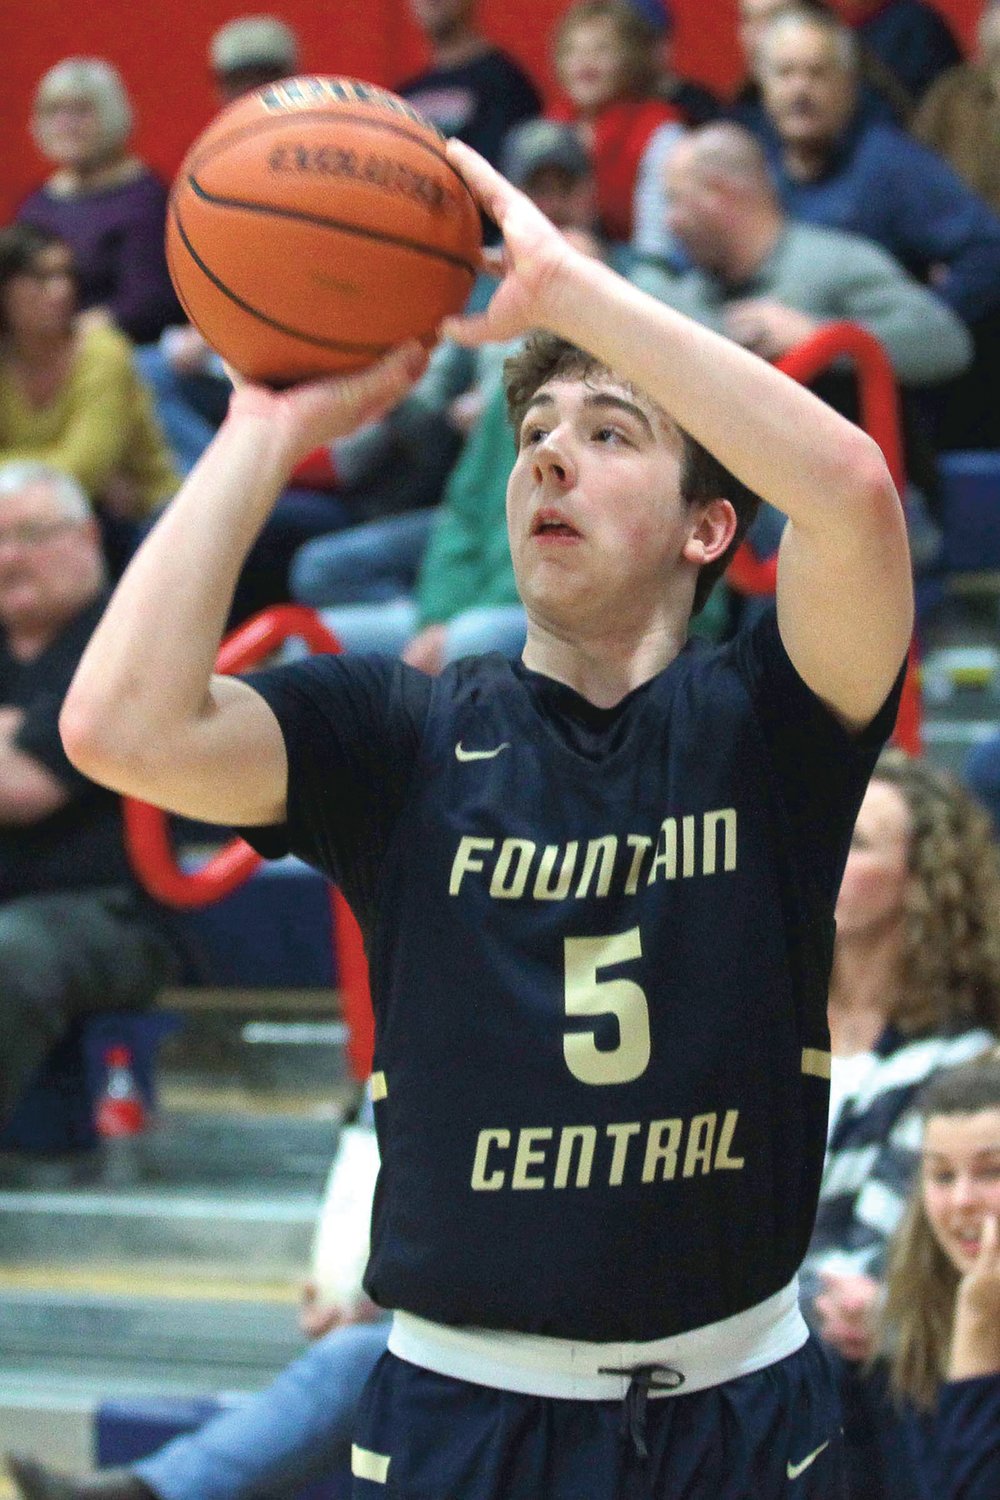 Andrew Shabi of Fountain Central hits one of his three-pointers in the first period.